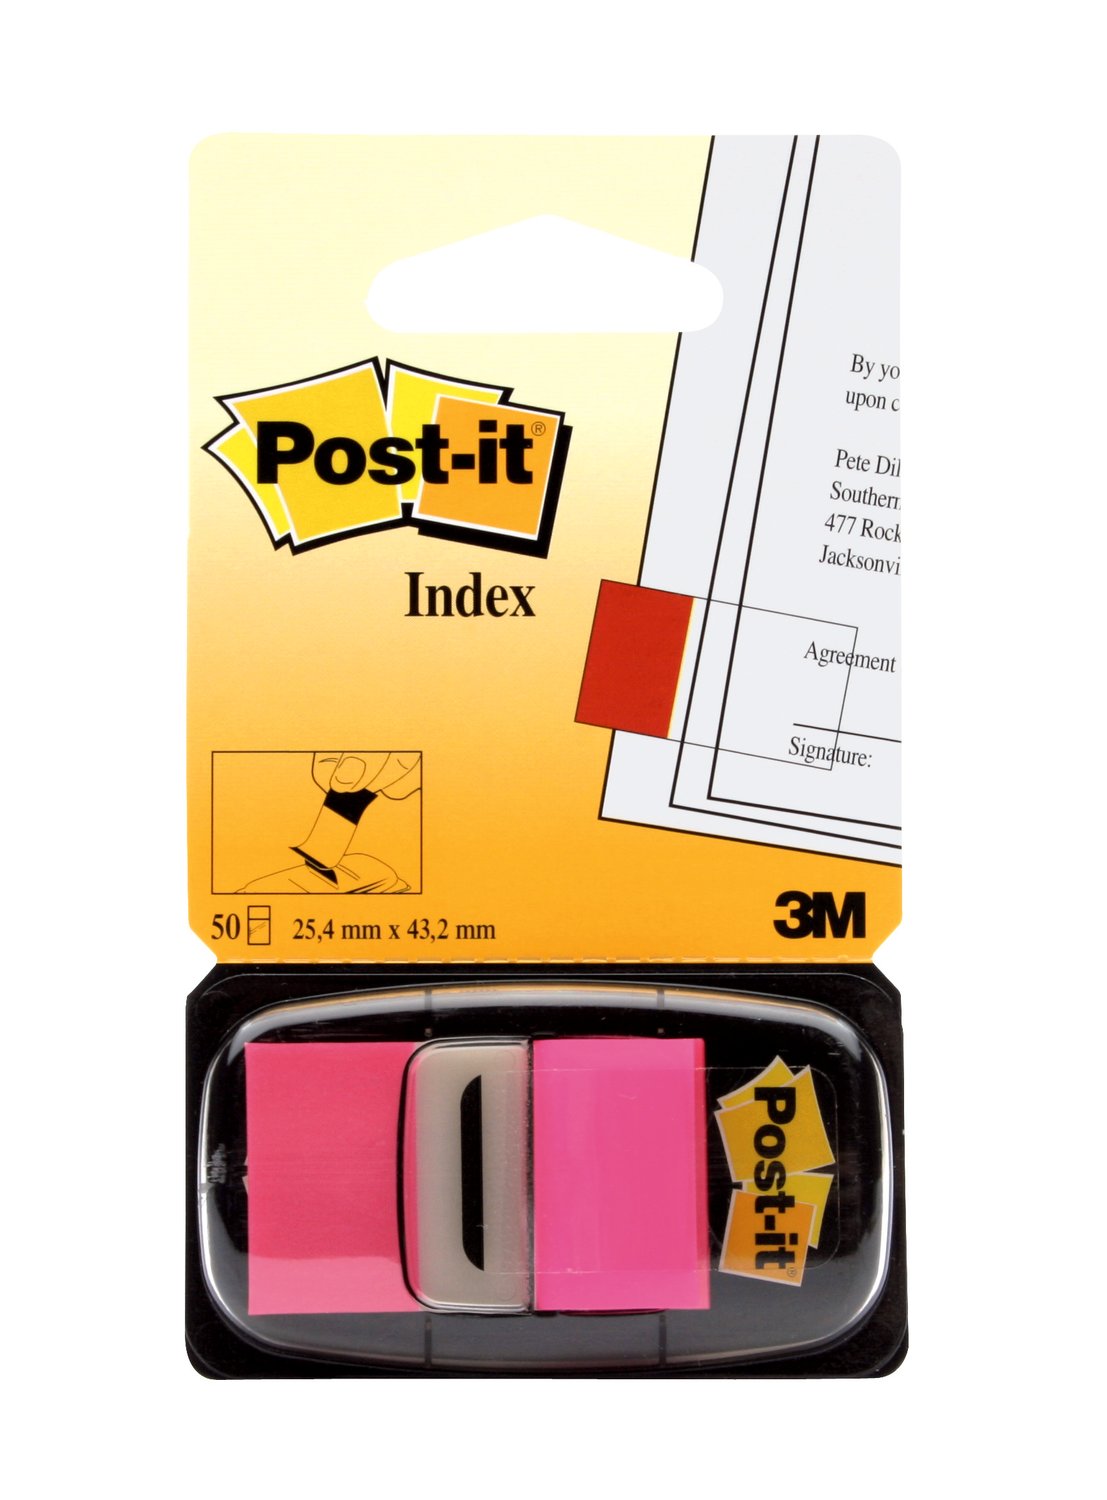 7000029845 - Post-it Flags 680-21 (36) 1 in. x 1.7 in. (25,4 mm x 43,2 mm) Bright
Pink